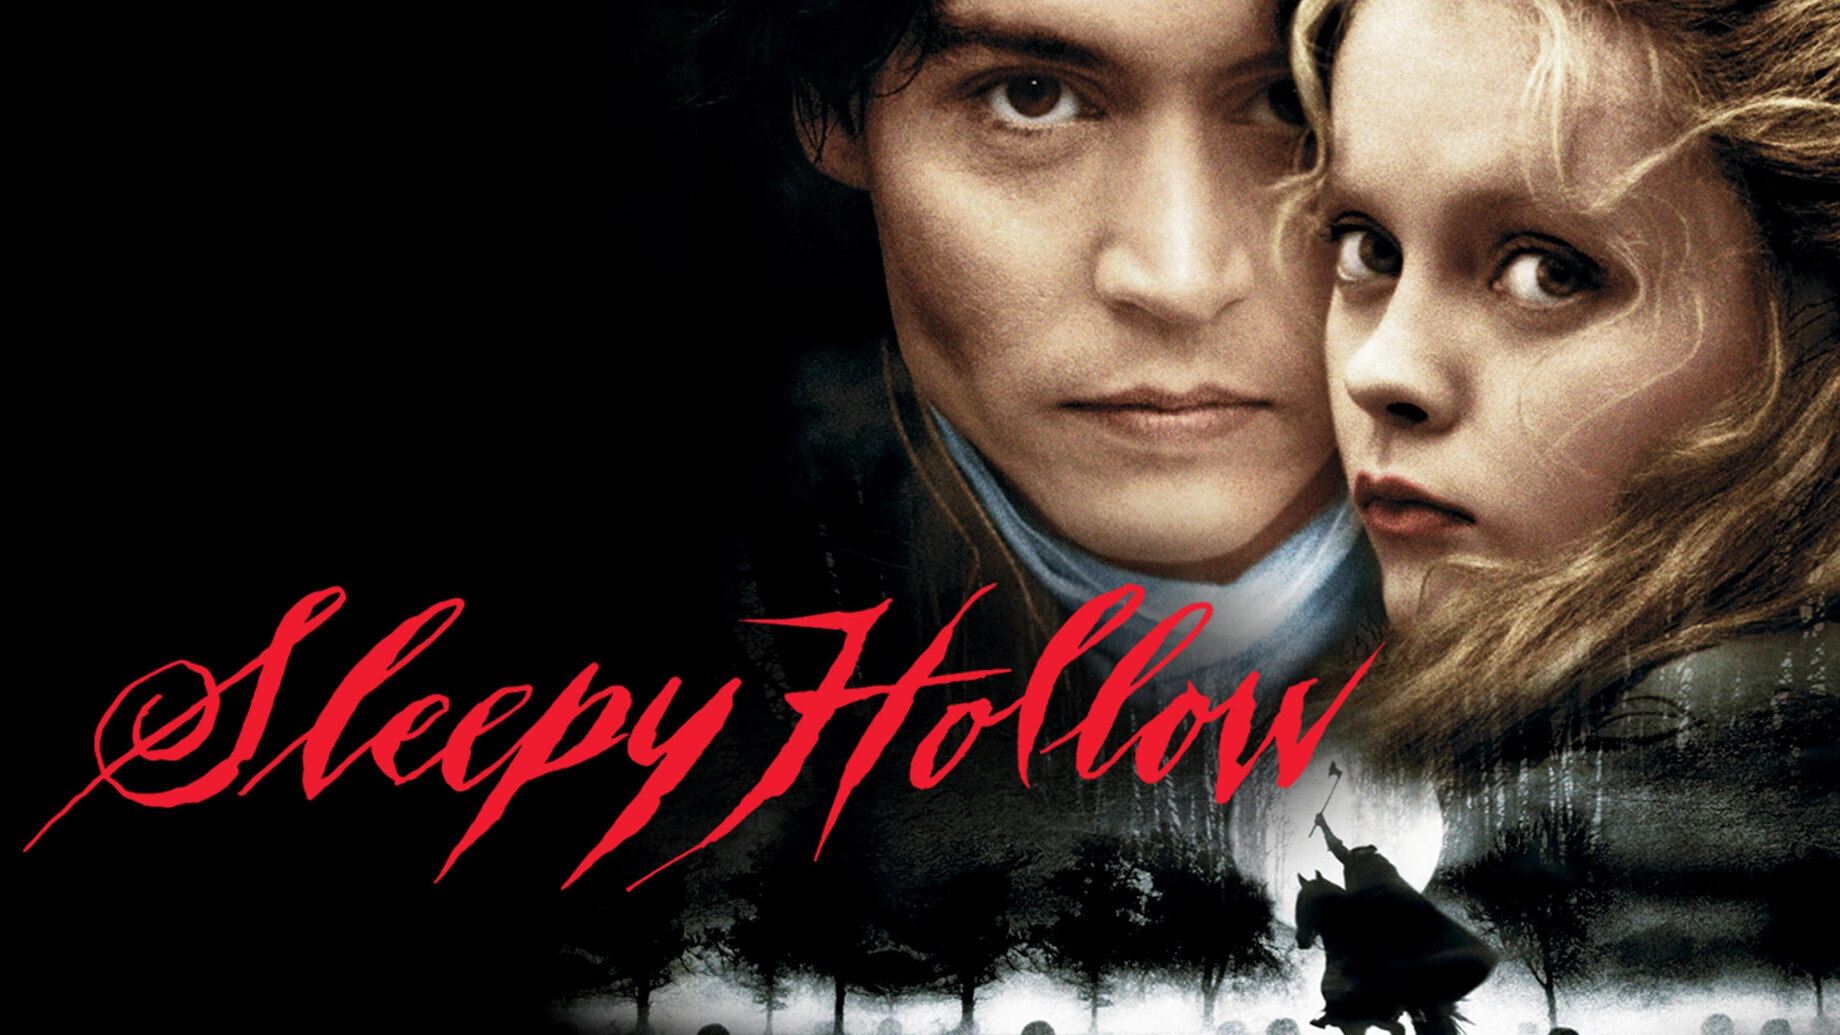 41-facts-about-the-movie-sleepy-hollow